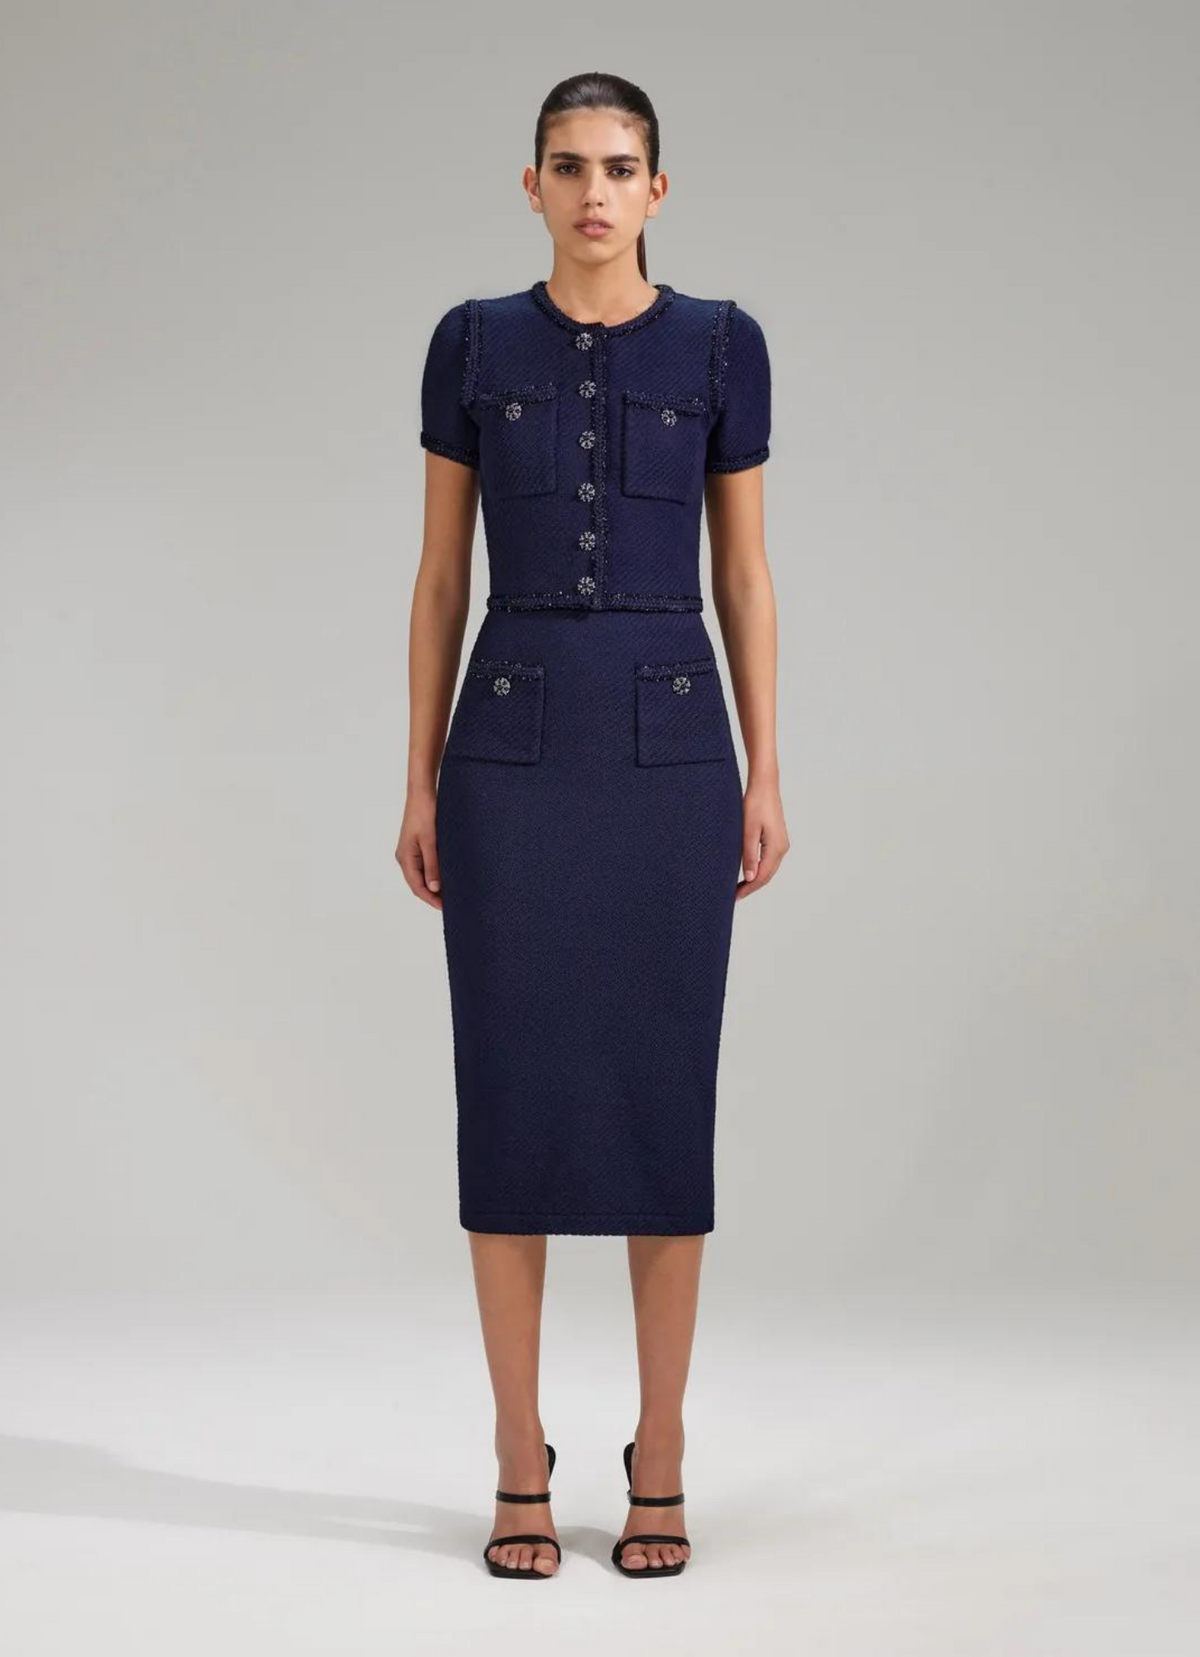 Midi navy knitted pull on skirt with two patch pockets and diamanté press stud buttons